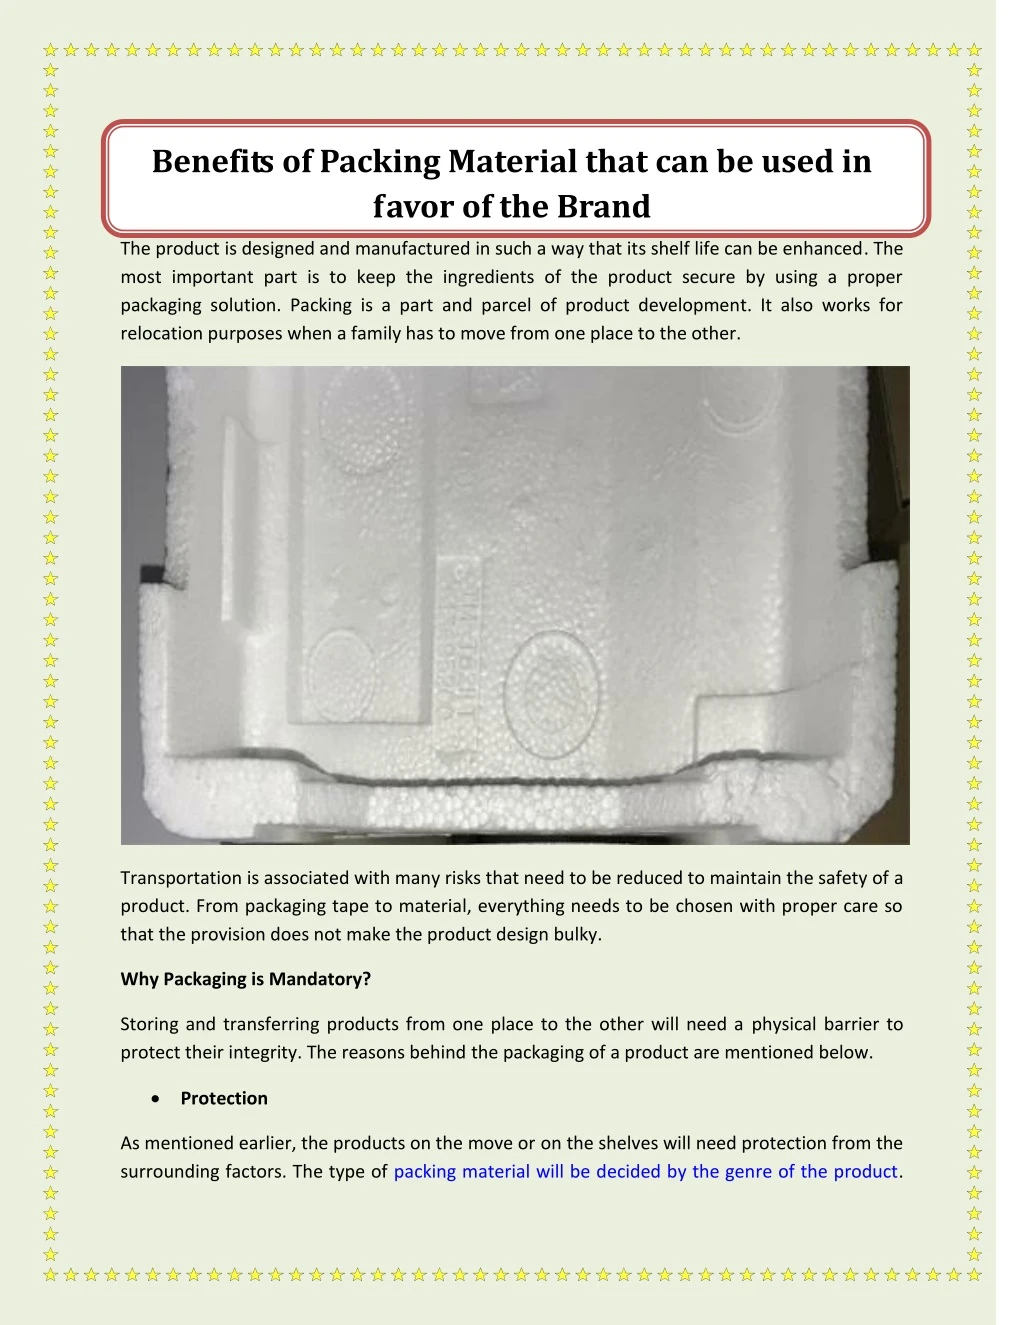 benefits of packing material that can be used